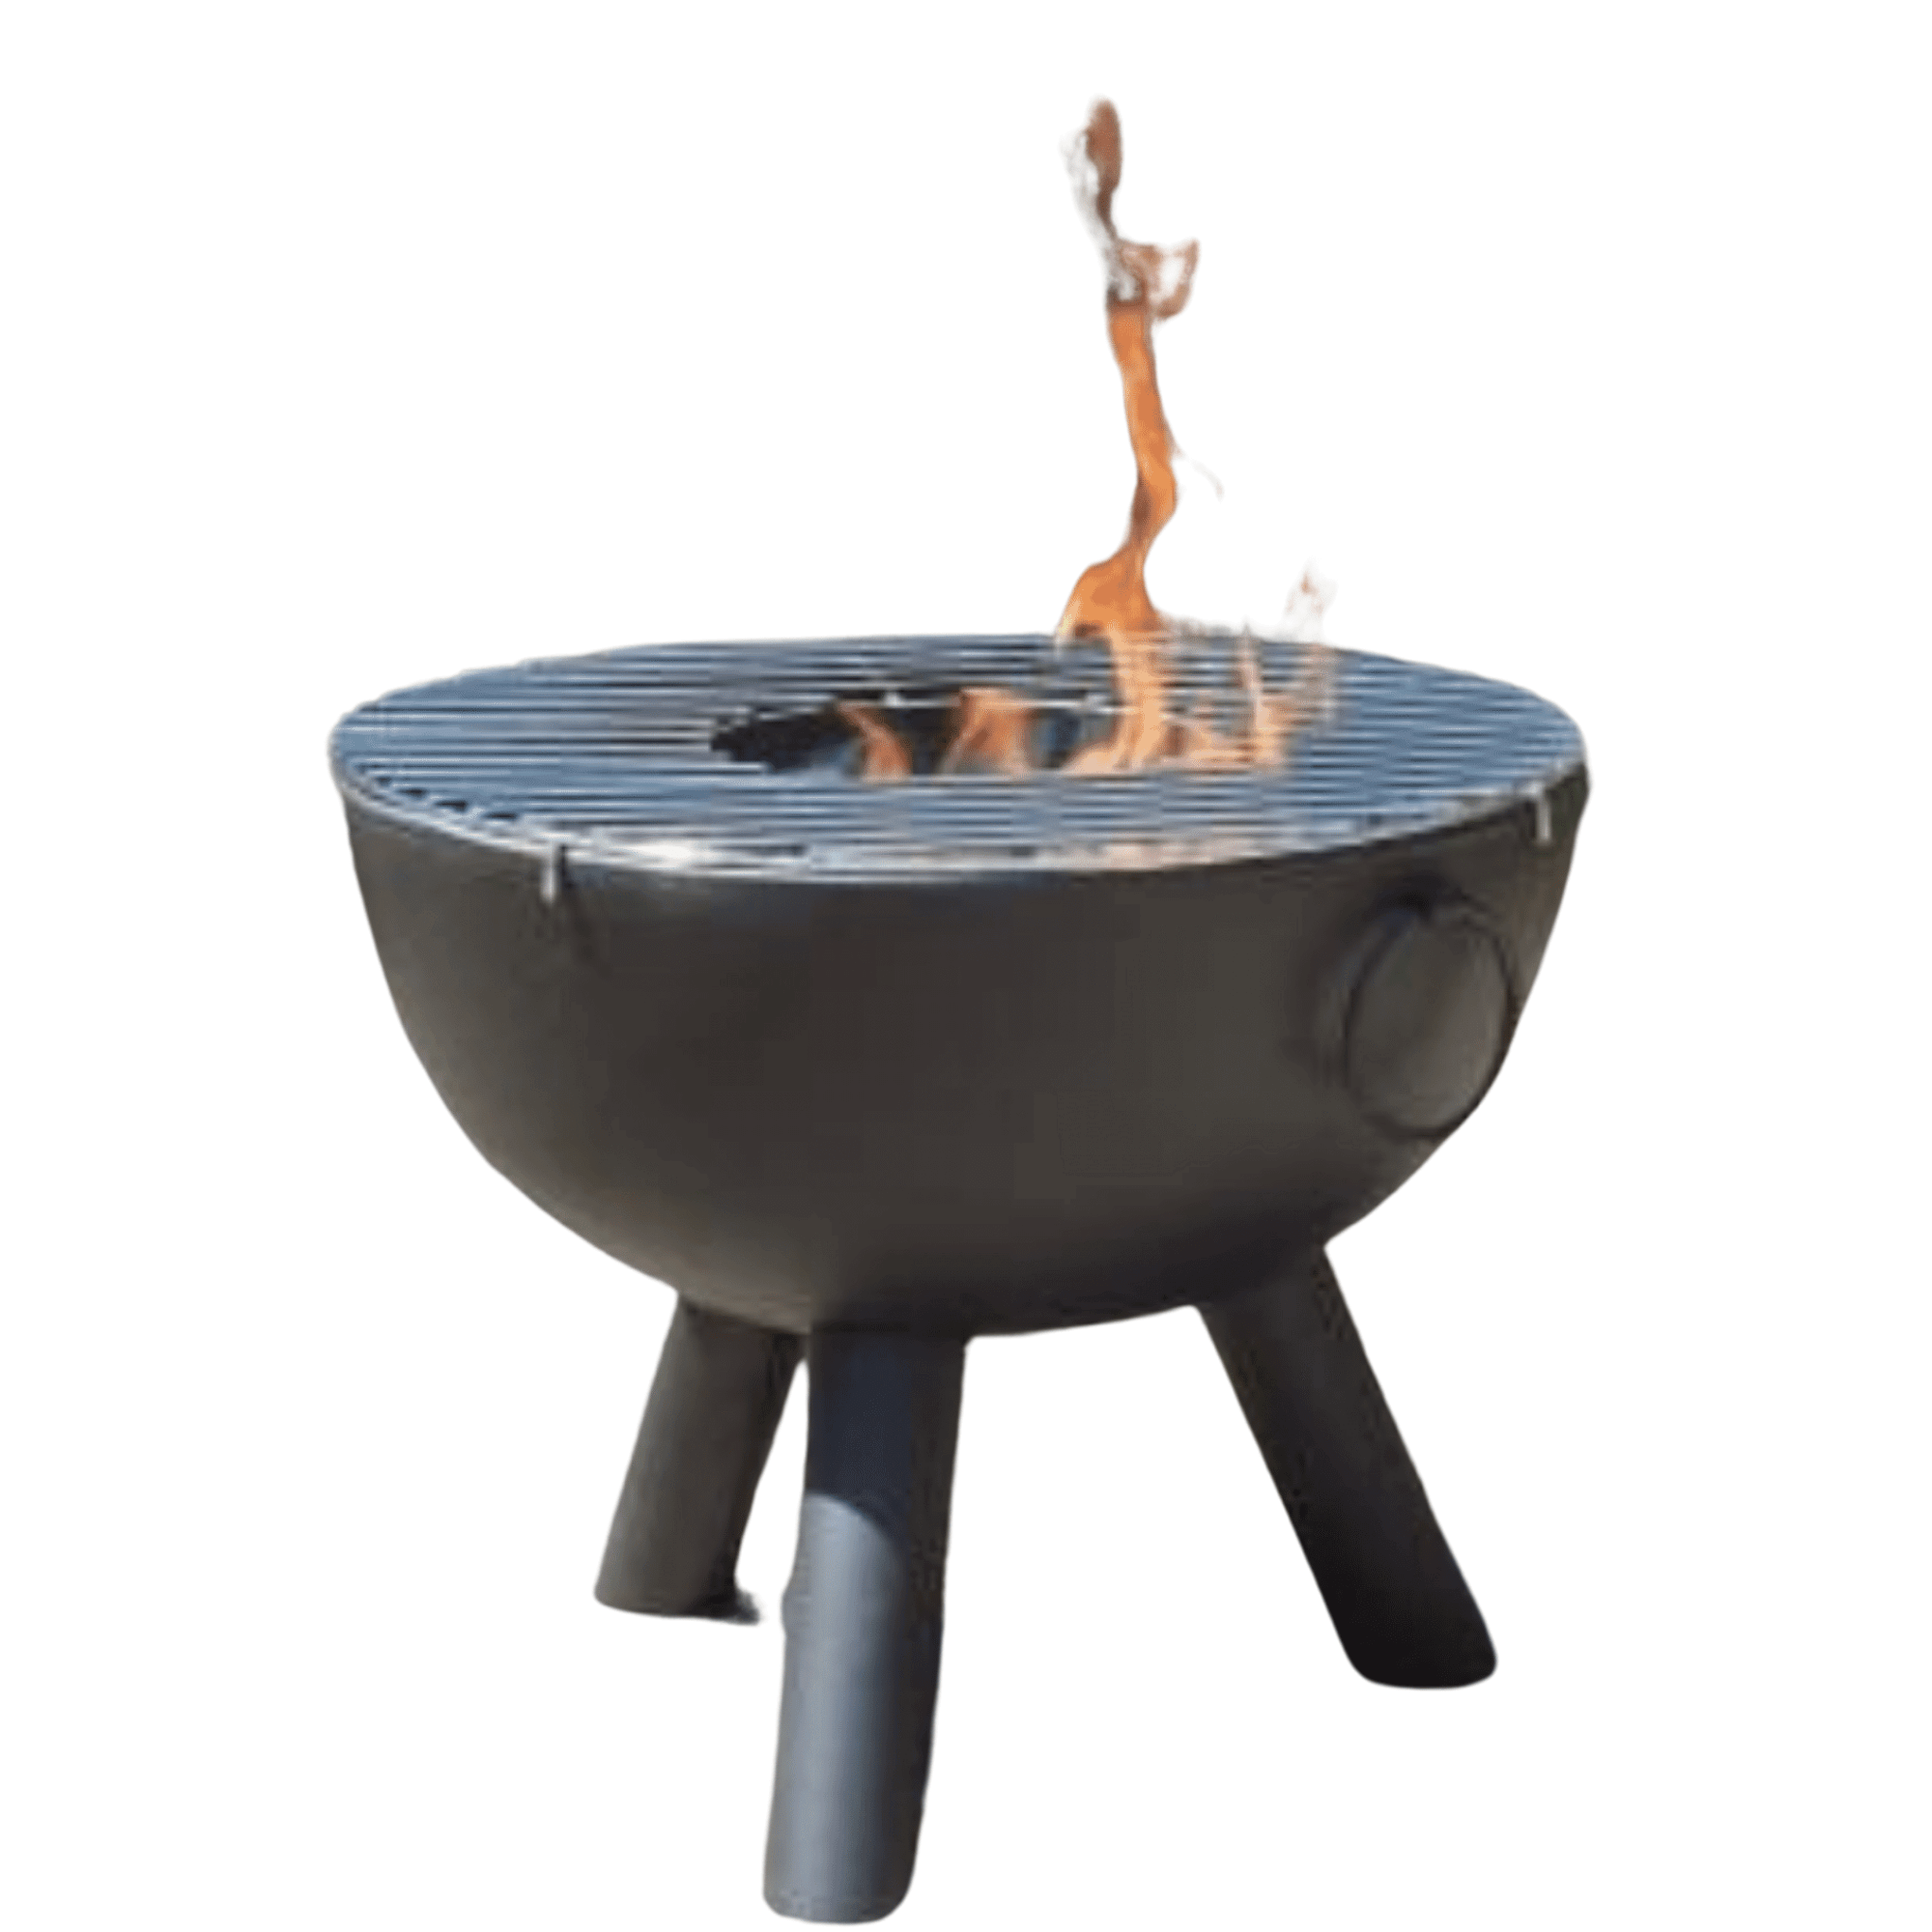 Perfect Patio CASA Large Steel Fire Bowl - inc BBQ grill